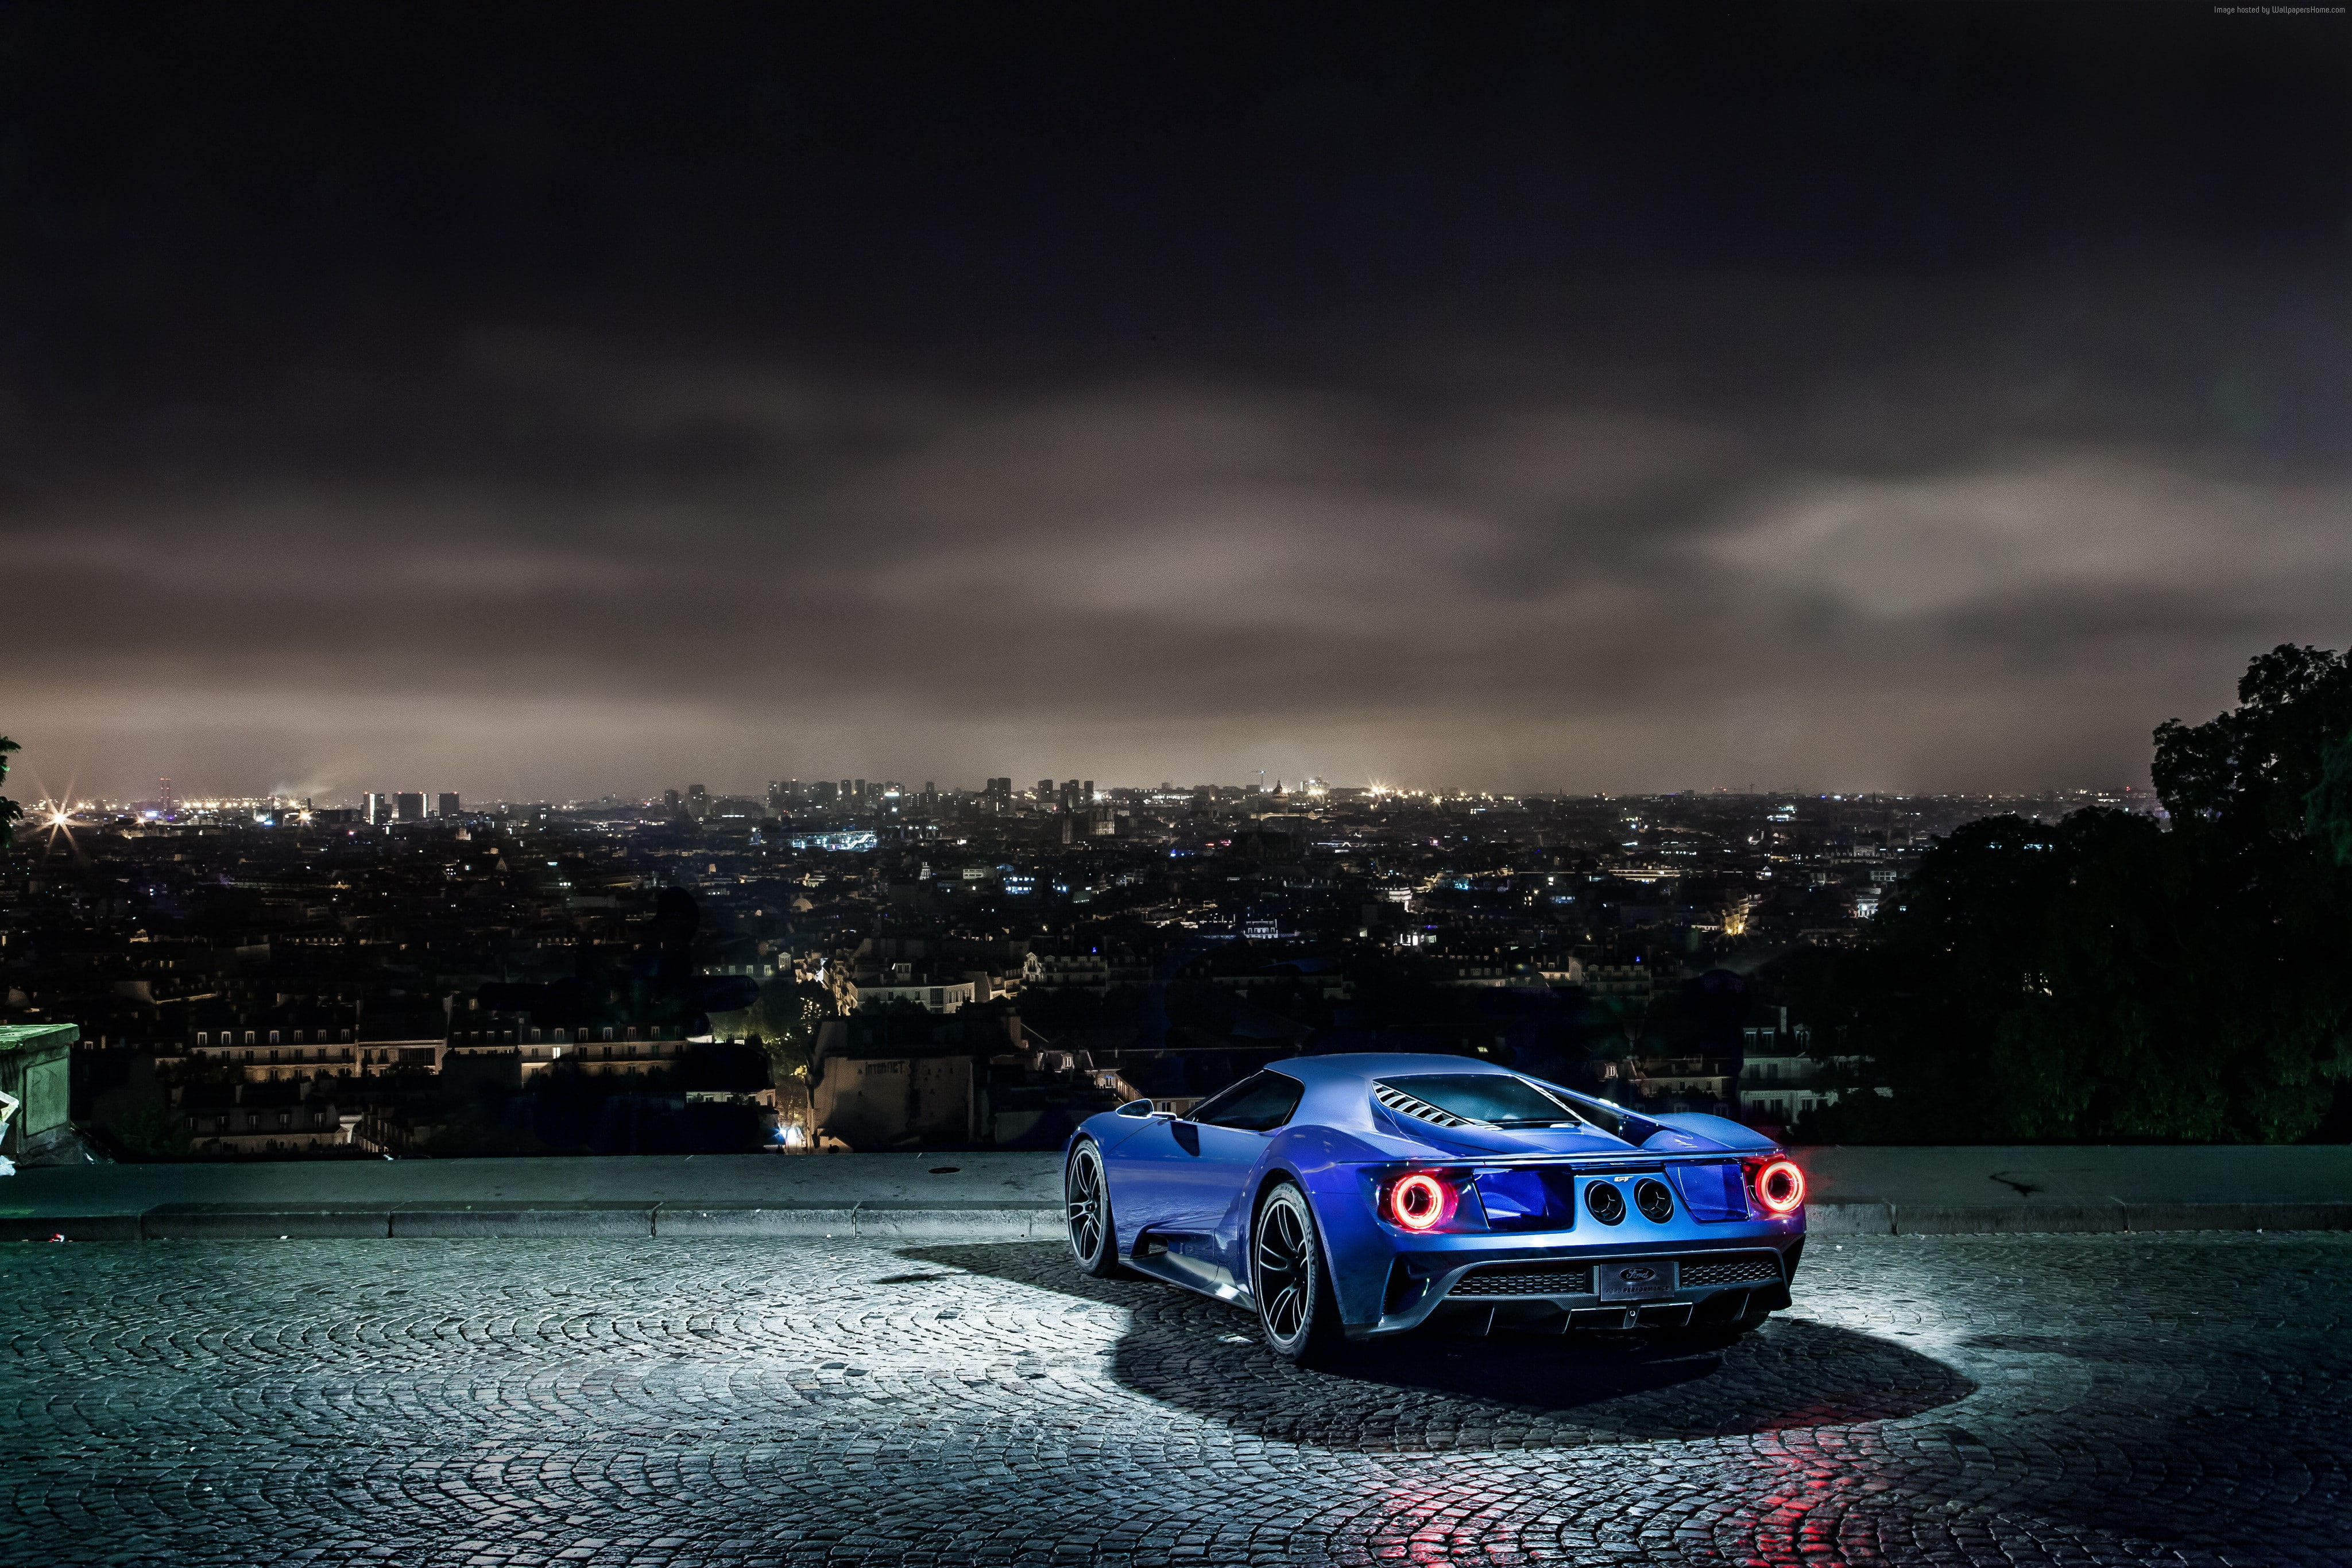 concept, Ford GT, supercar, blue, luxury cars, sports car, test drive